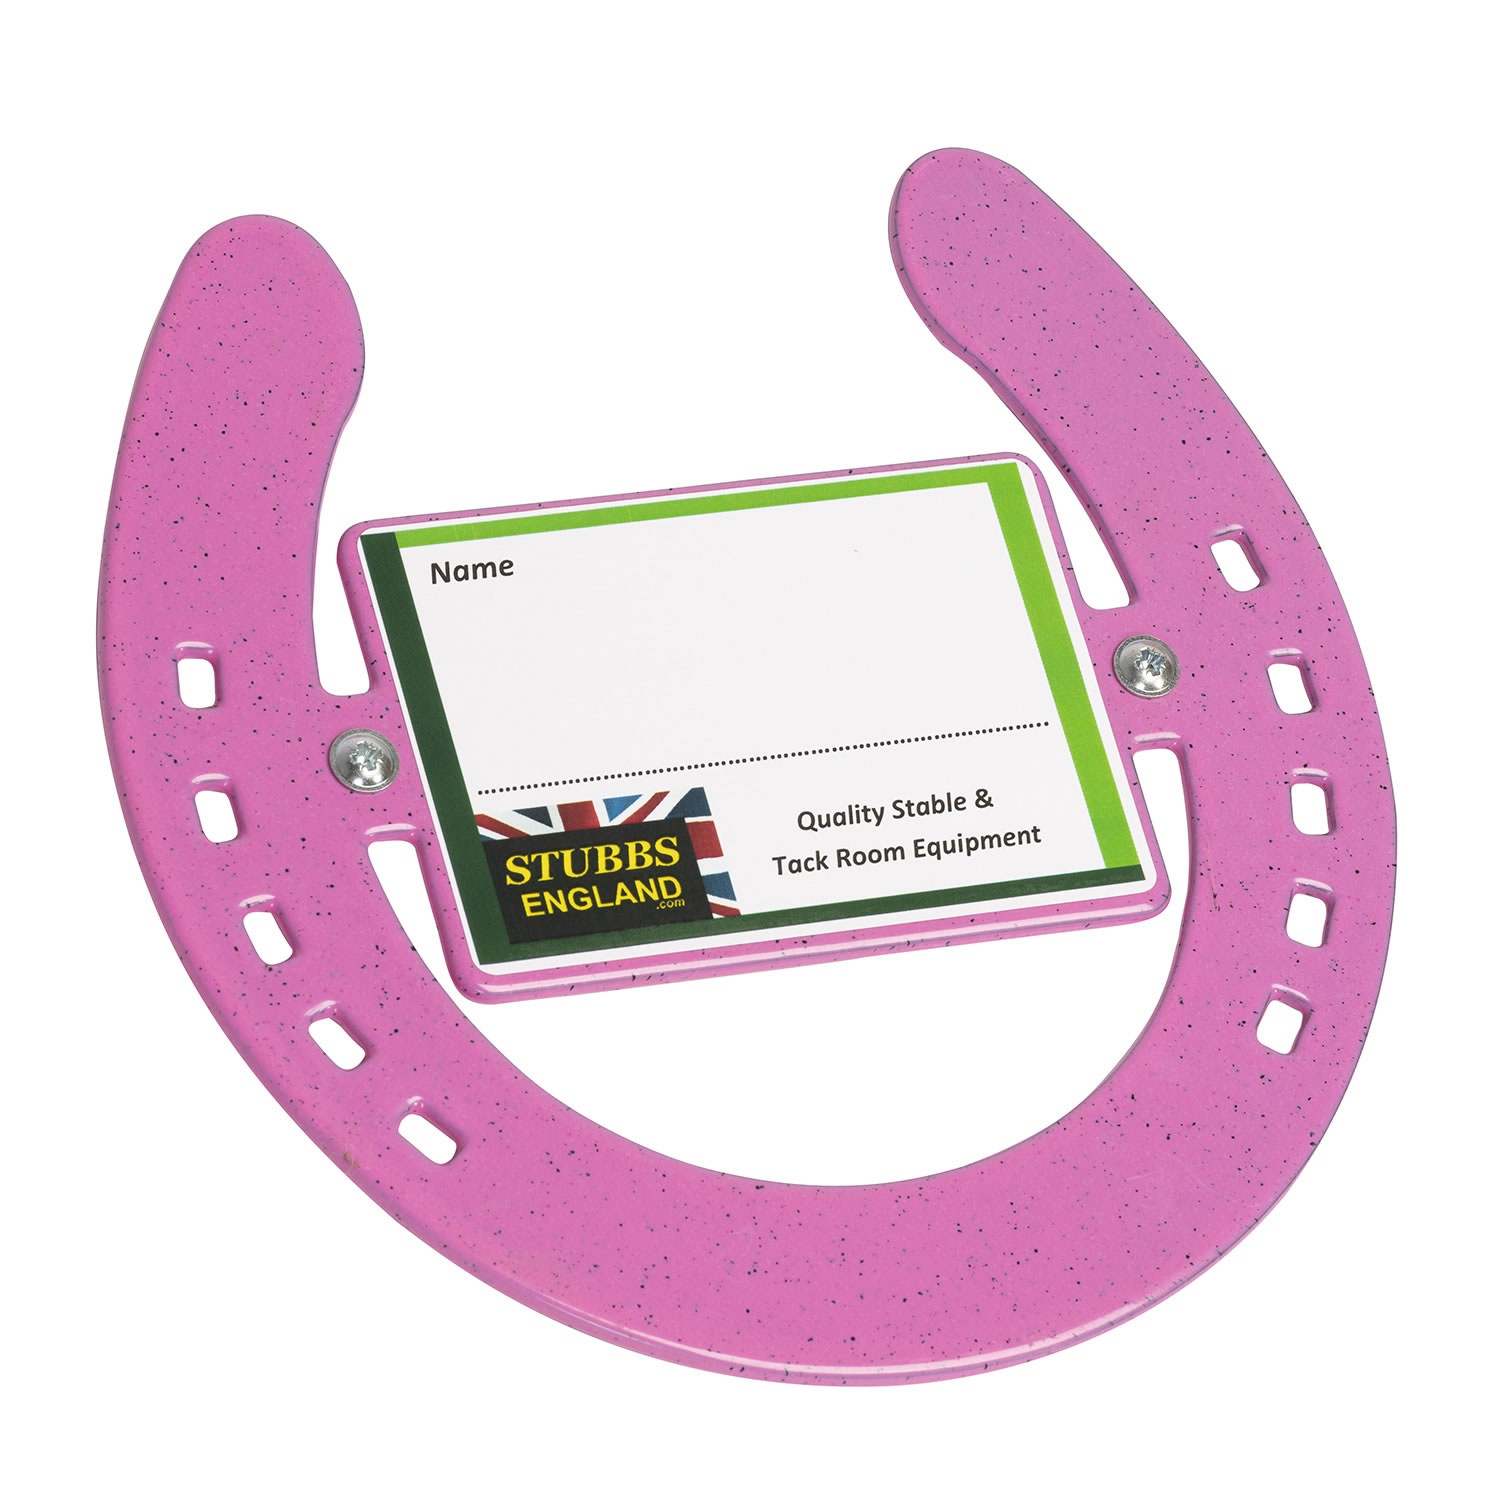 STUBBS HORSESHOE WITH NAME PLATE S2670 PINK